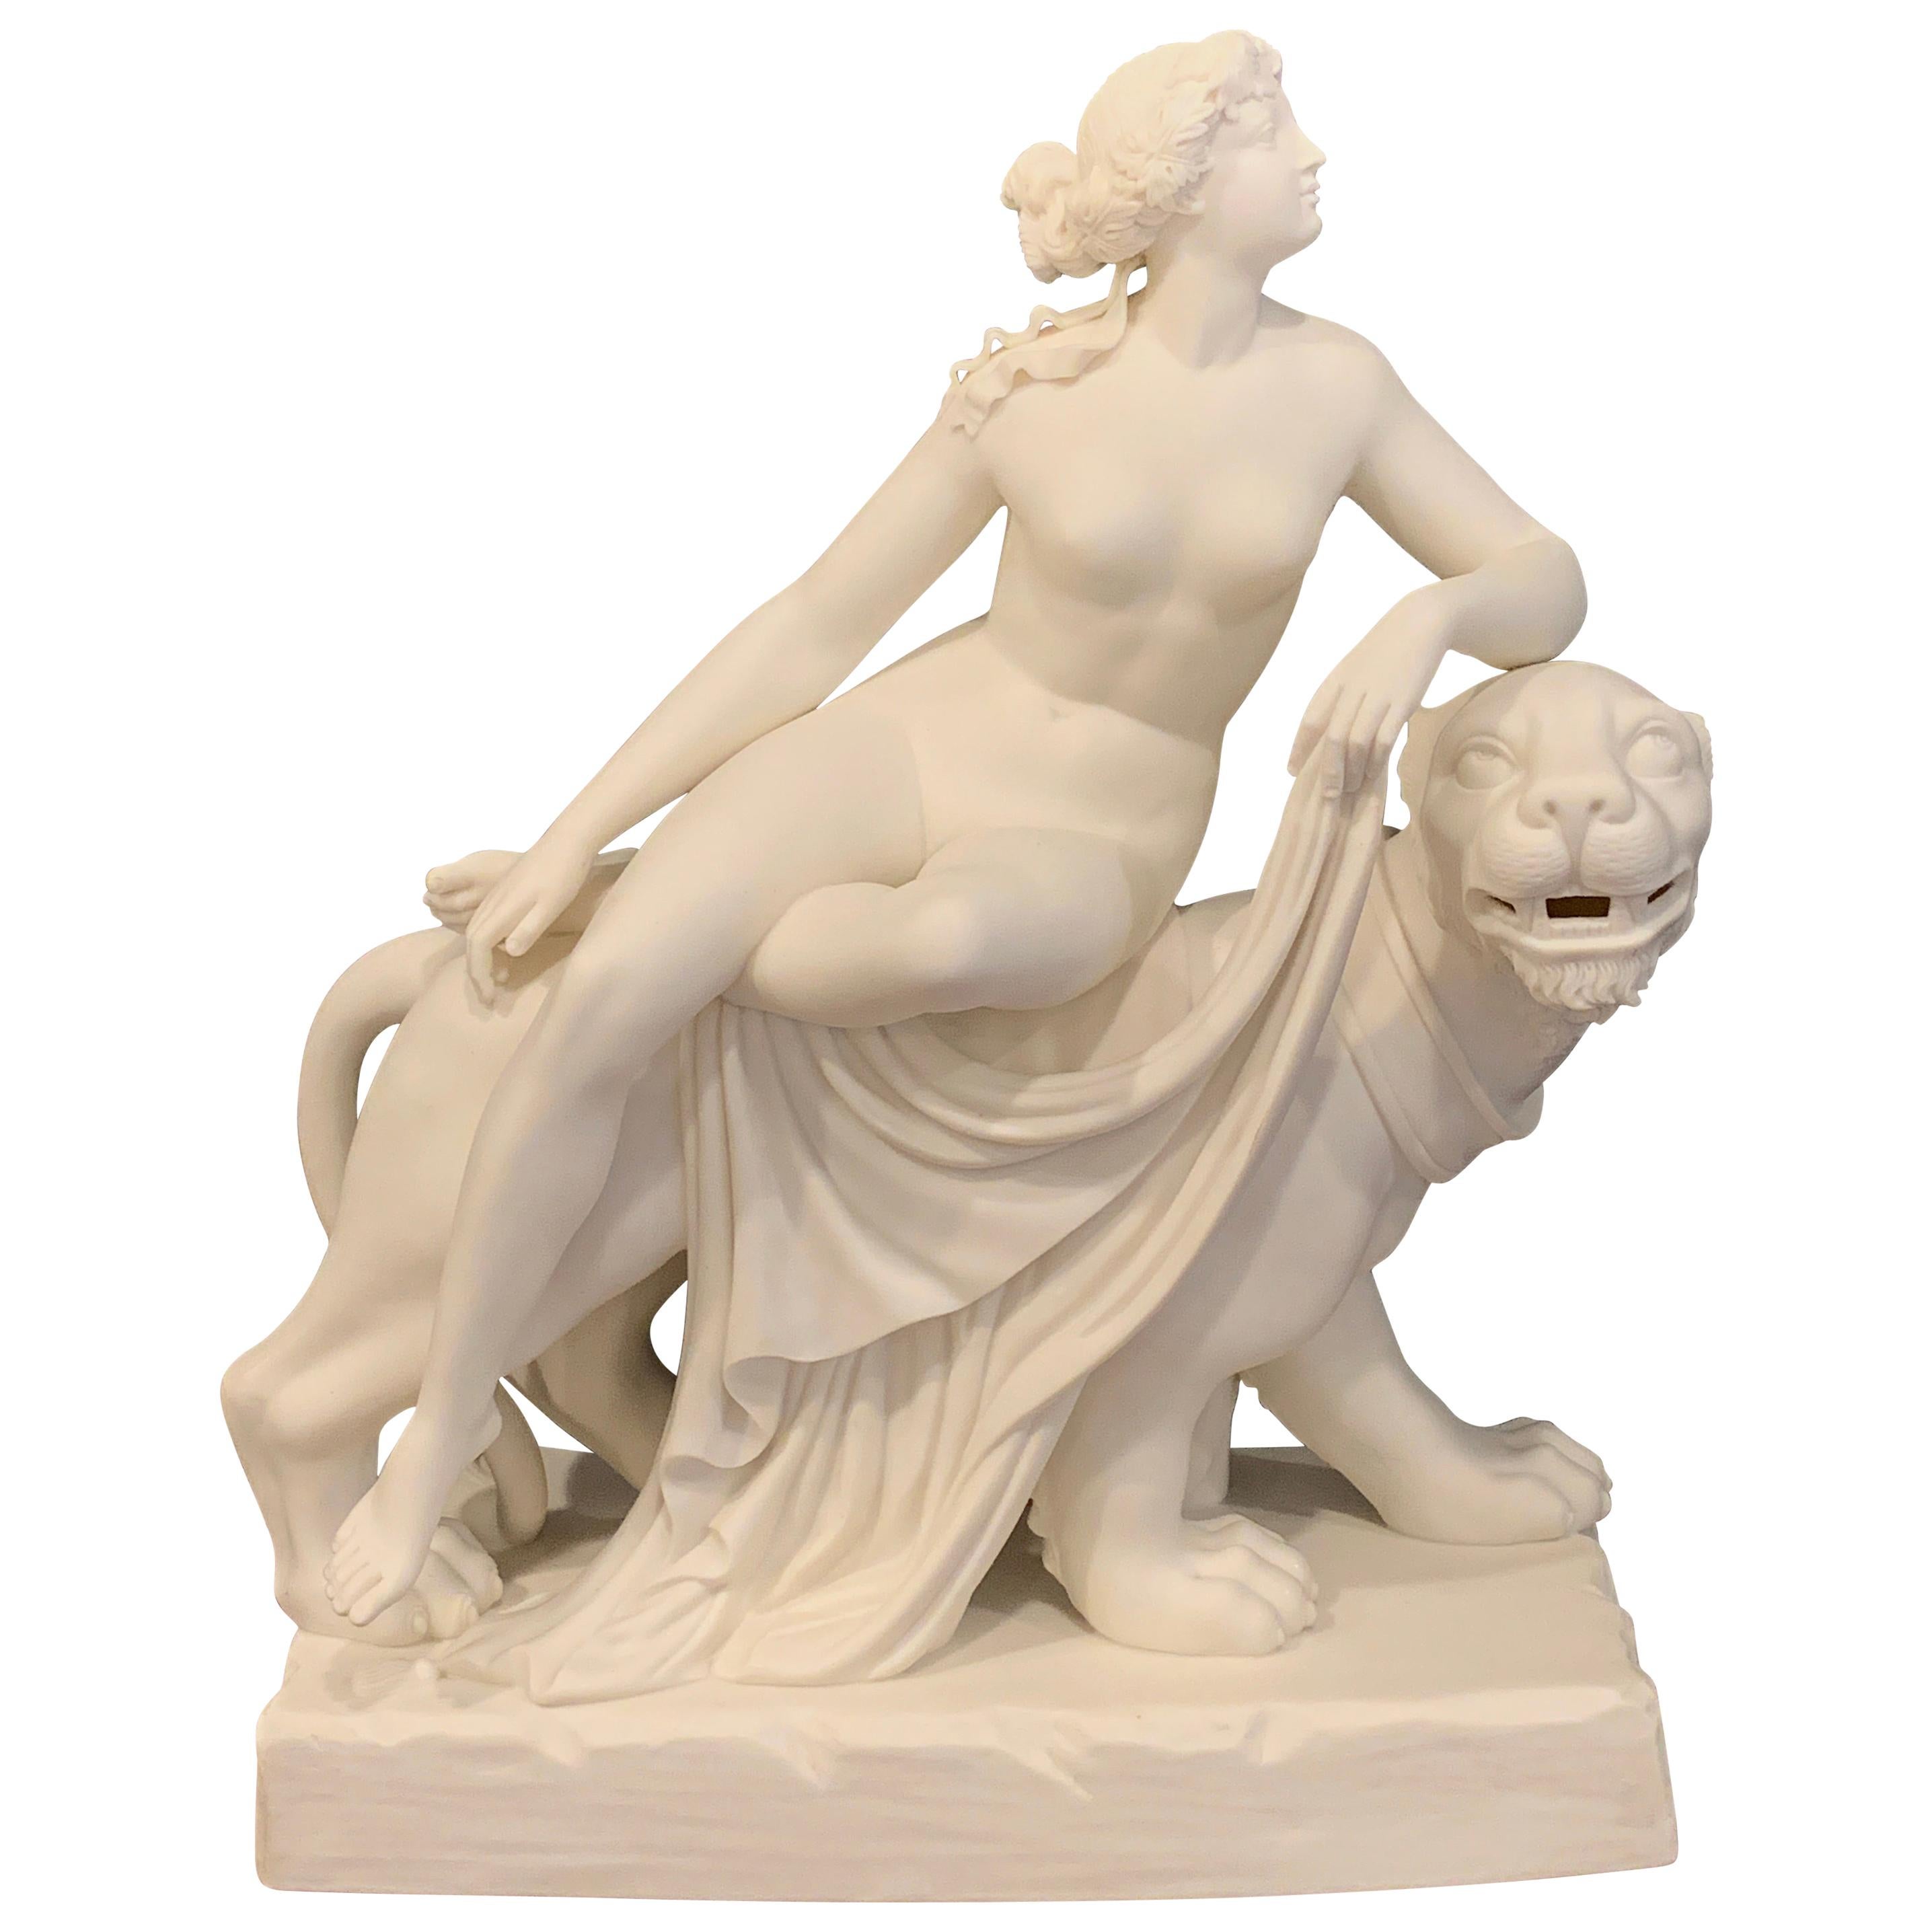 Parian "Ariadne and the Panther" After John Bell, Attributed to Mintons For Sale